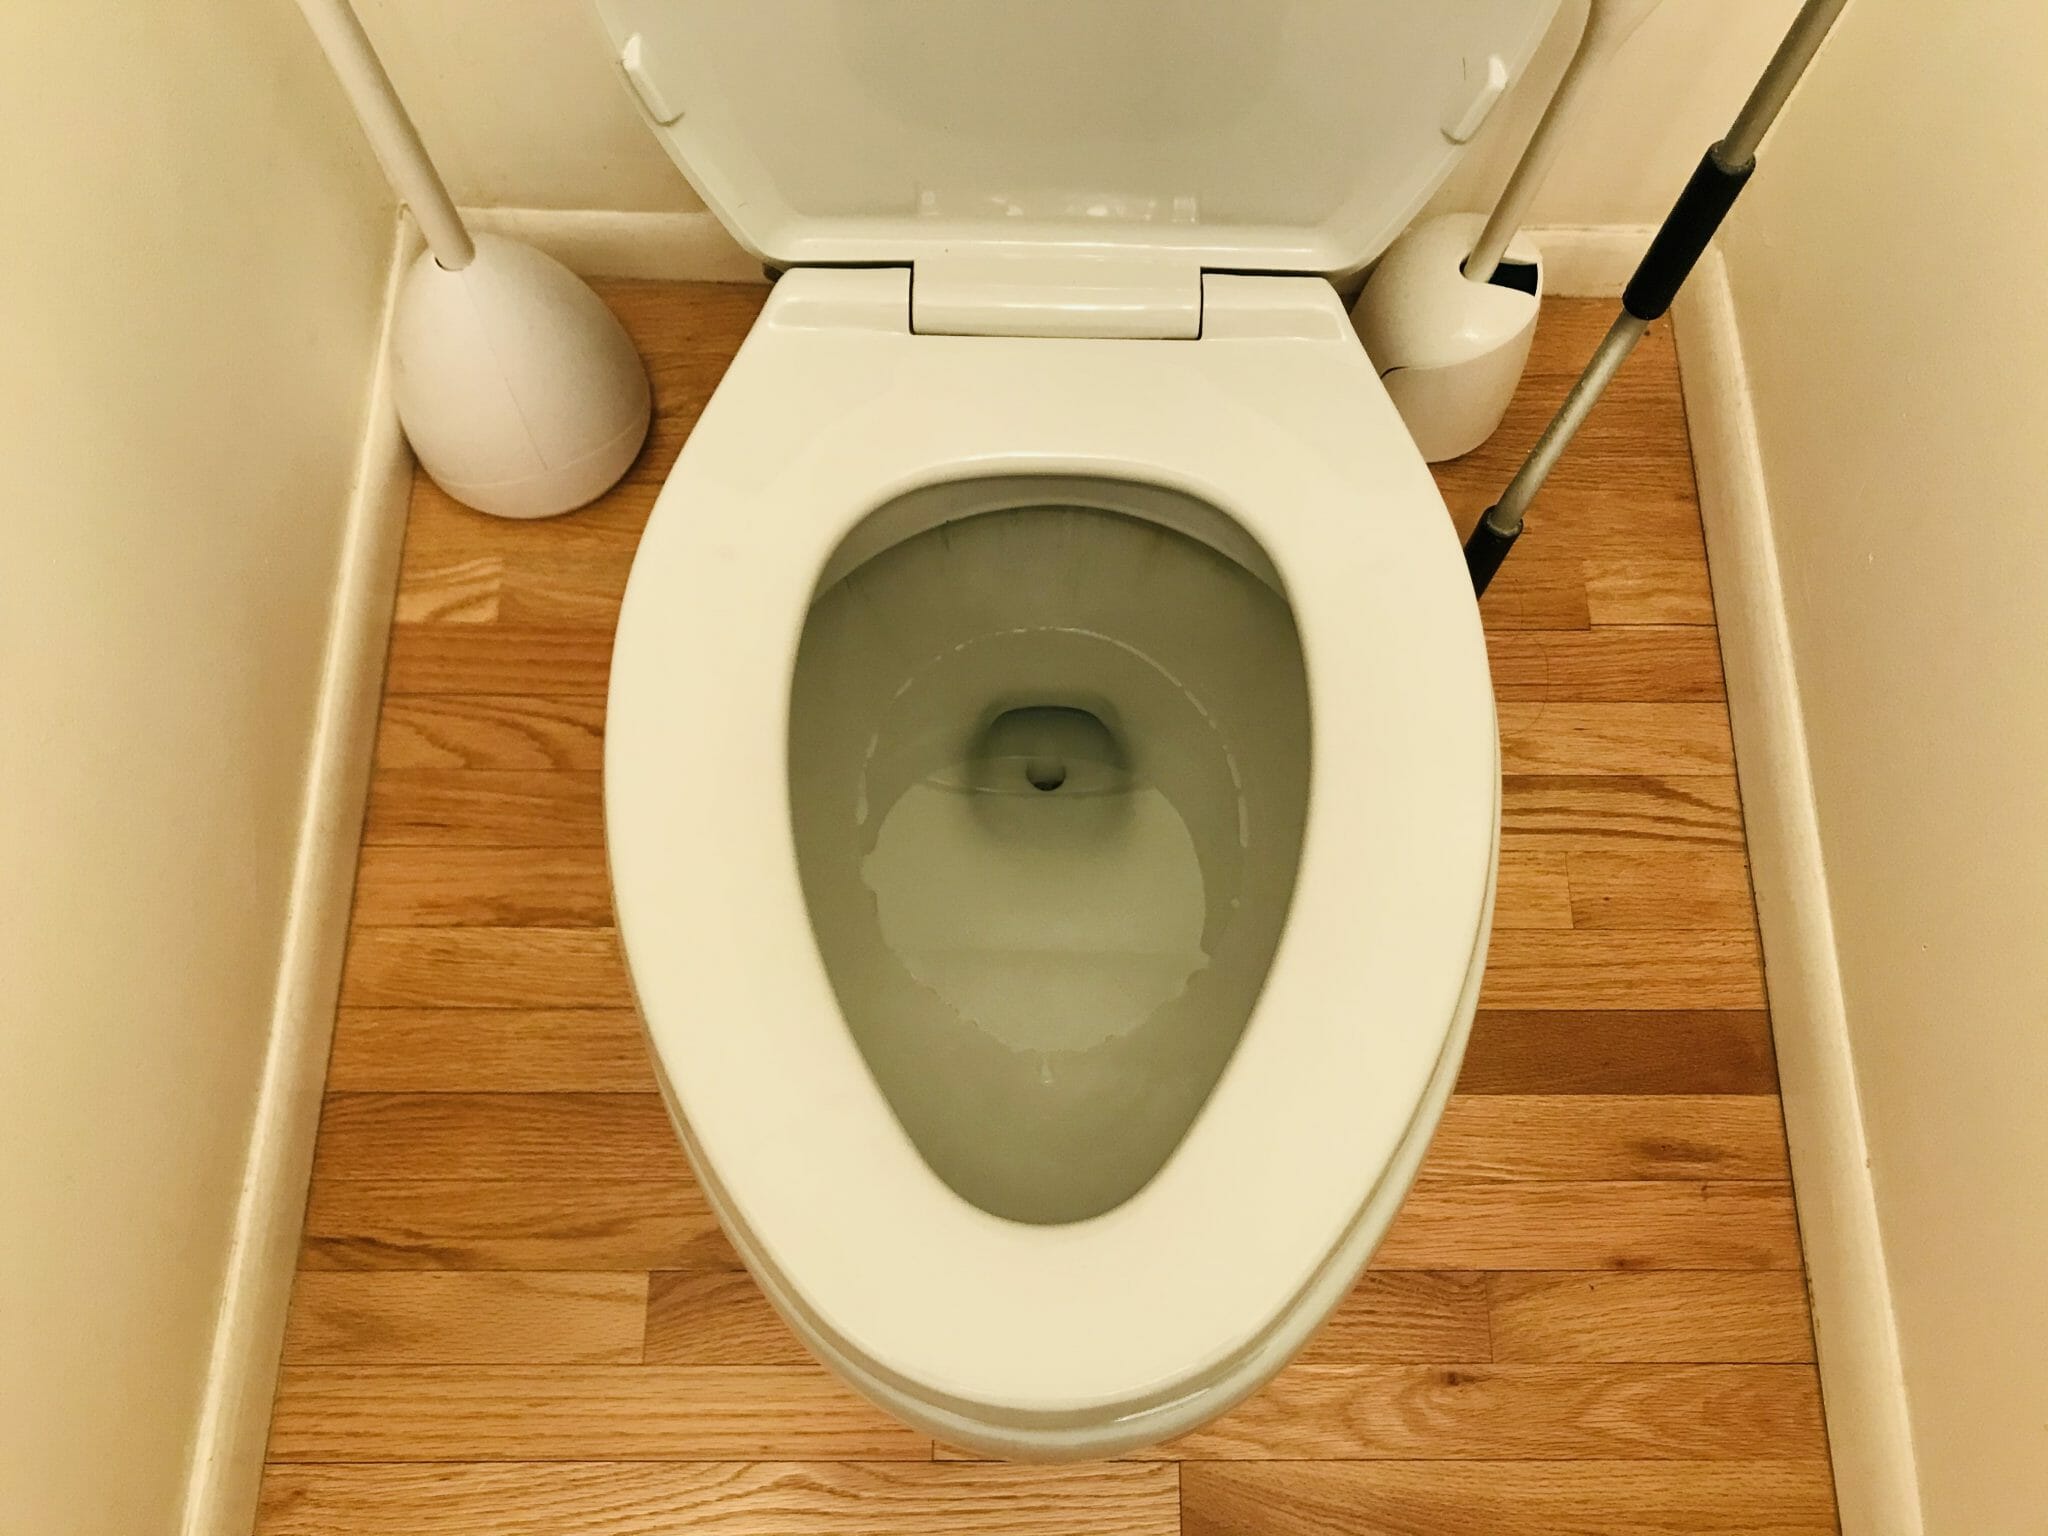 Should You Use Toilet Paper Alternatives? - Flood Brothers Plumbing